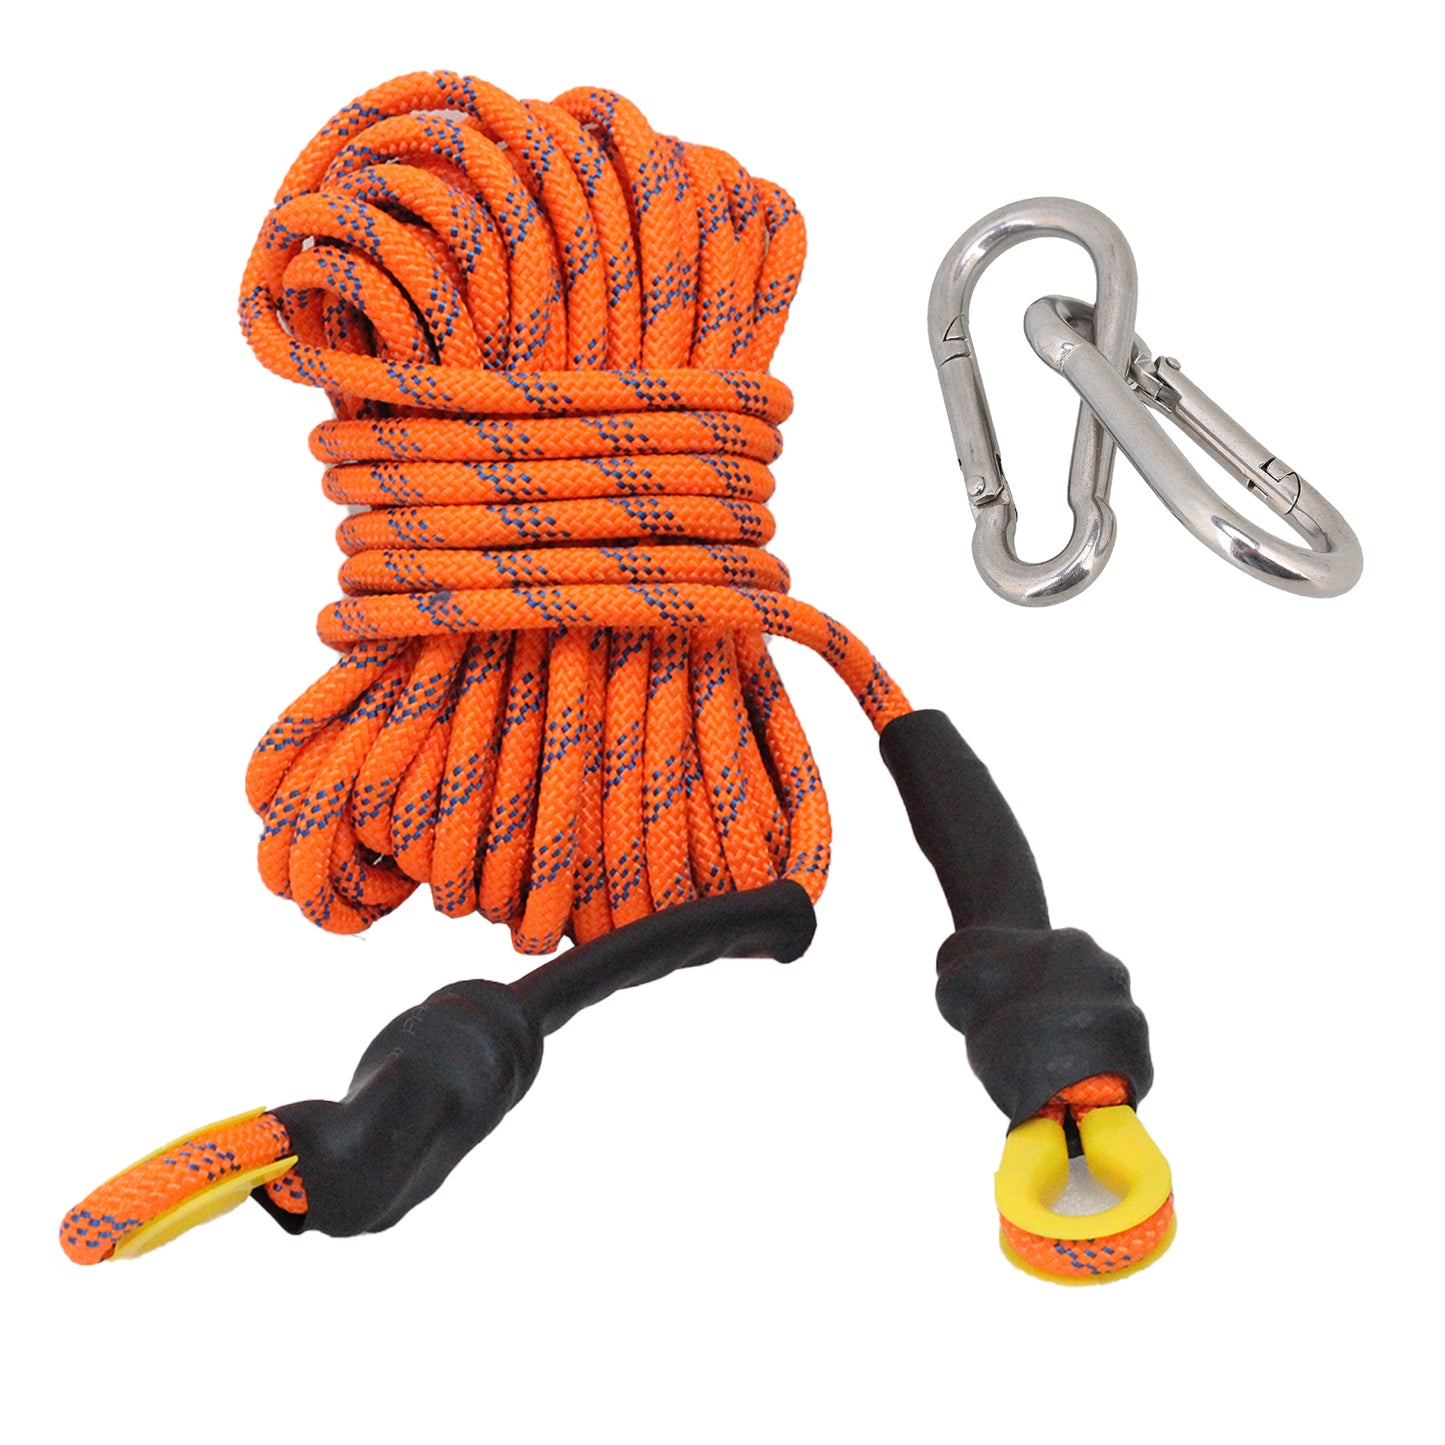 Kernmantle, Climbing Rope with Hook, 10 MM Static Hiking, Rescue and Parachute, Rappelling Rope, Mountaineering, Tensile Force Upto - 20 KN